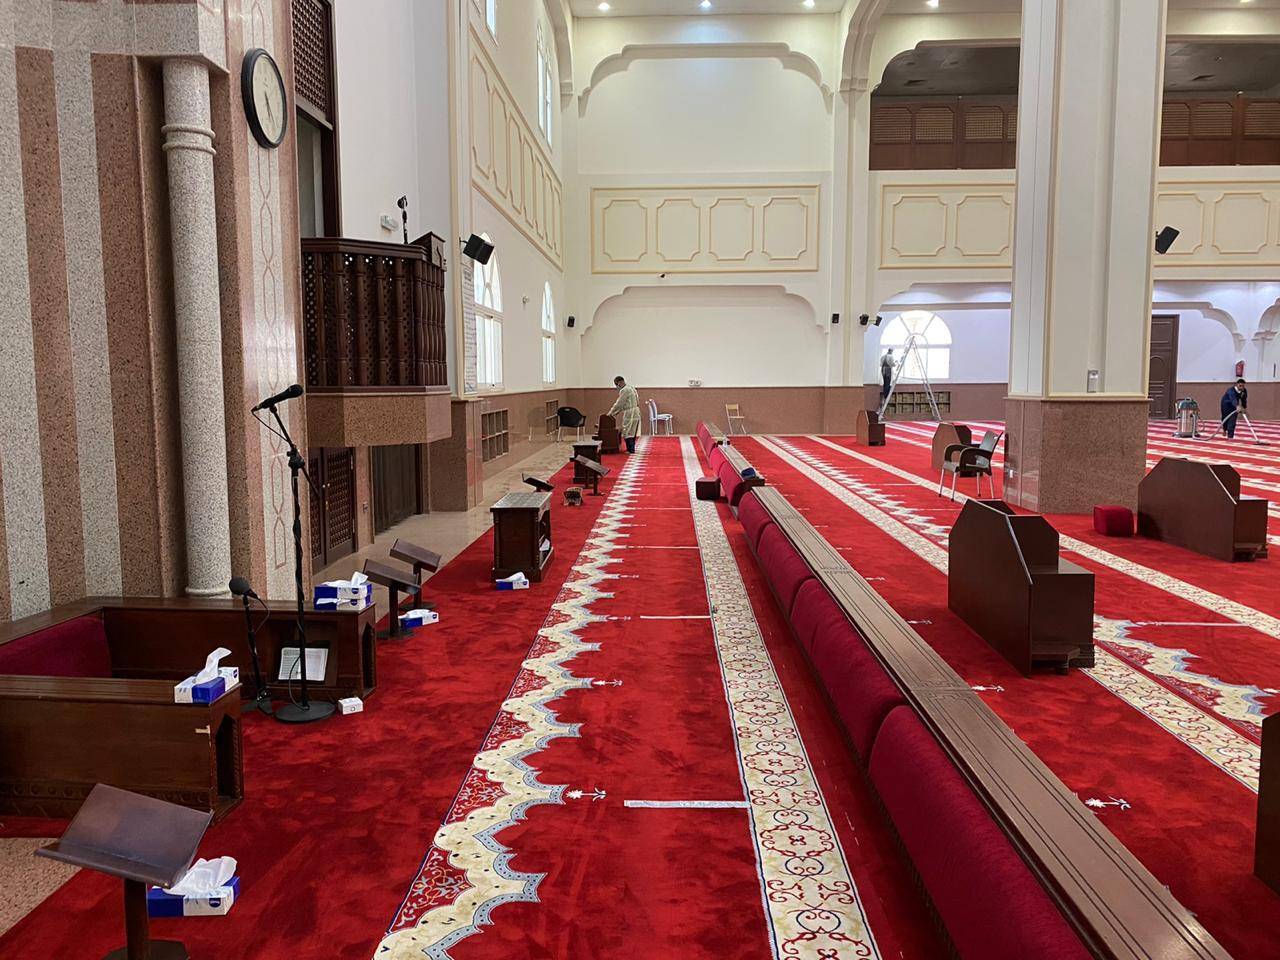 Over 90,000 mosques to reopen on Sunday after sanitization